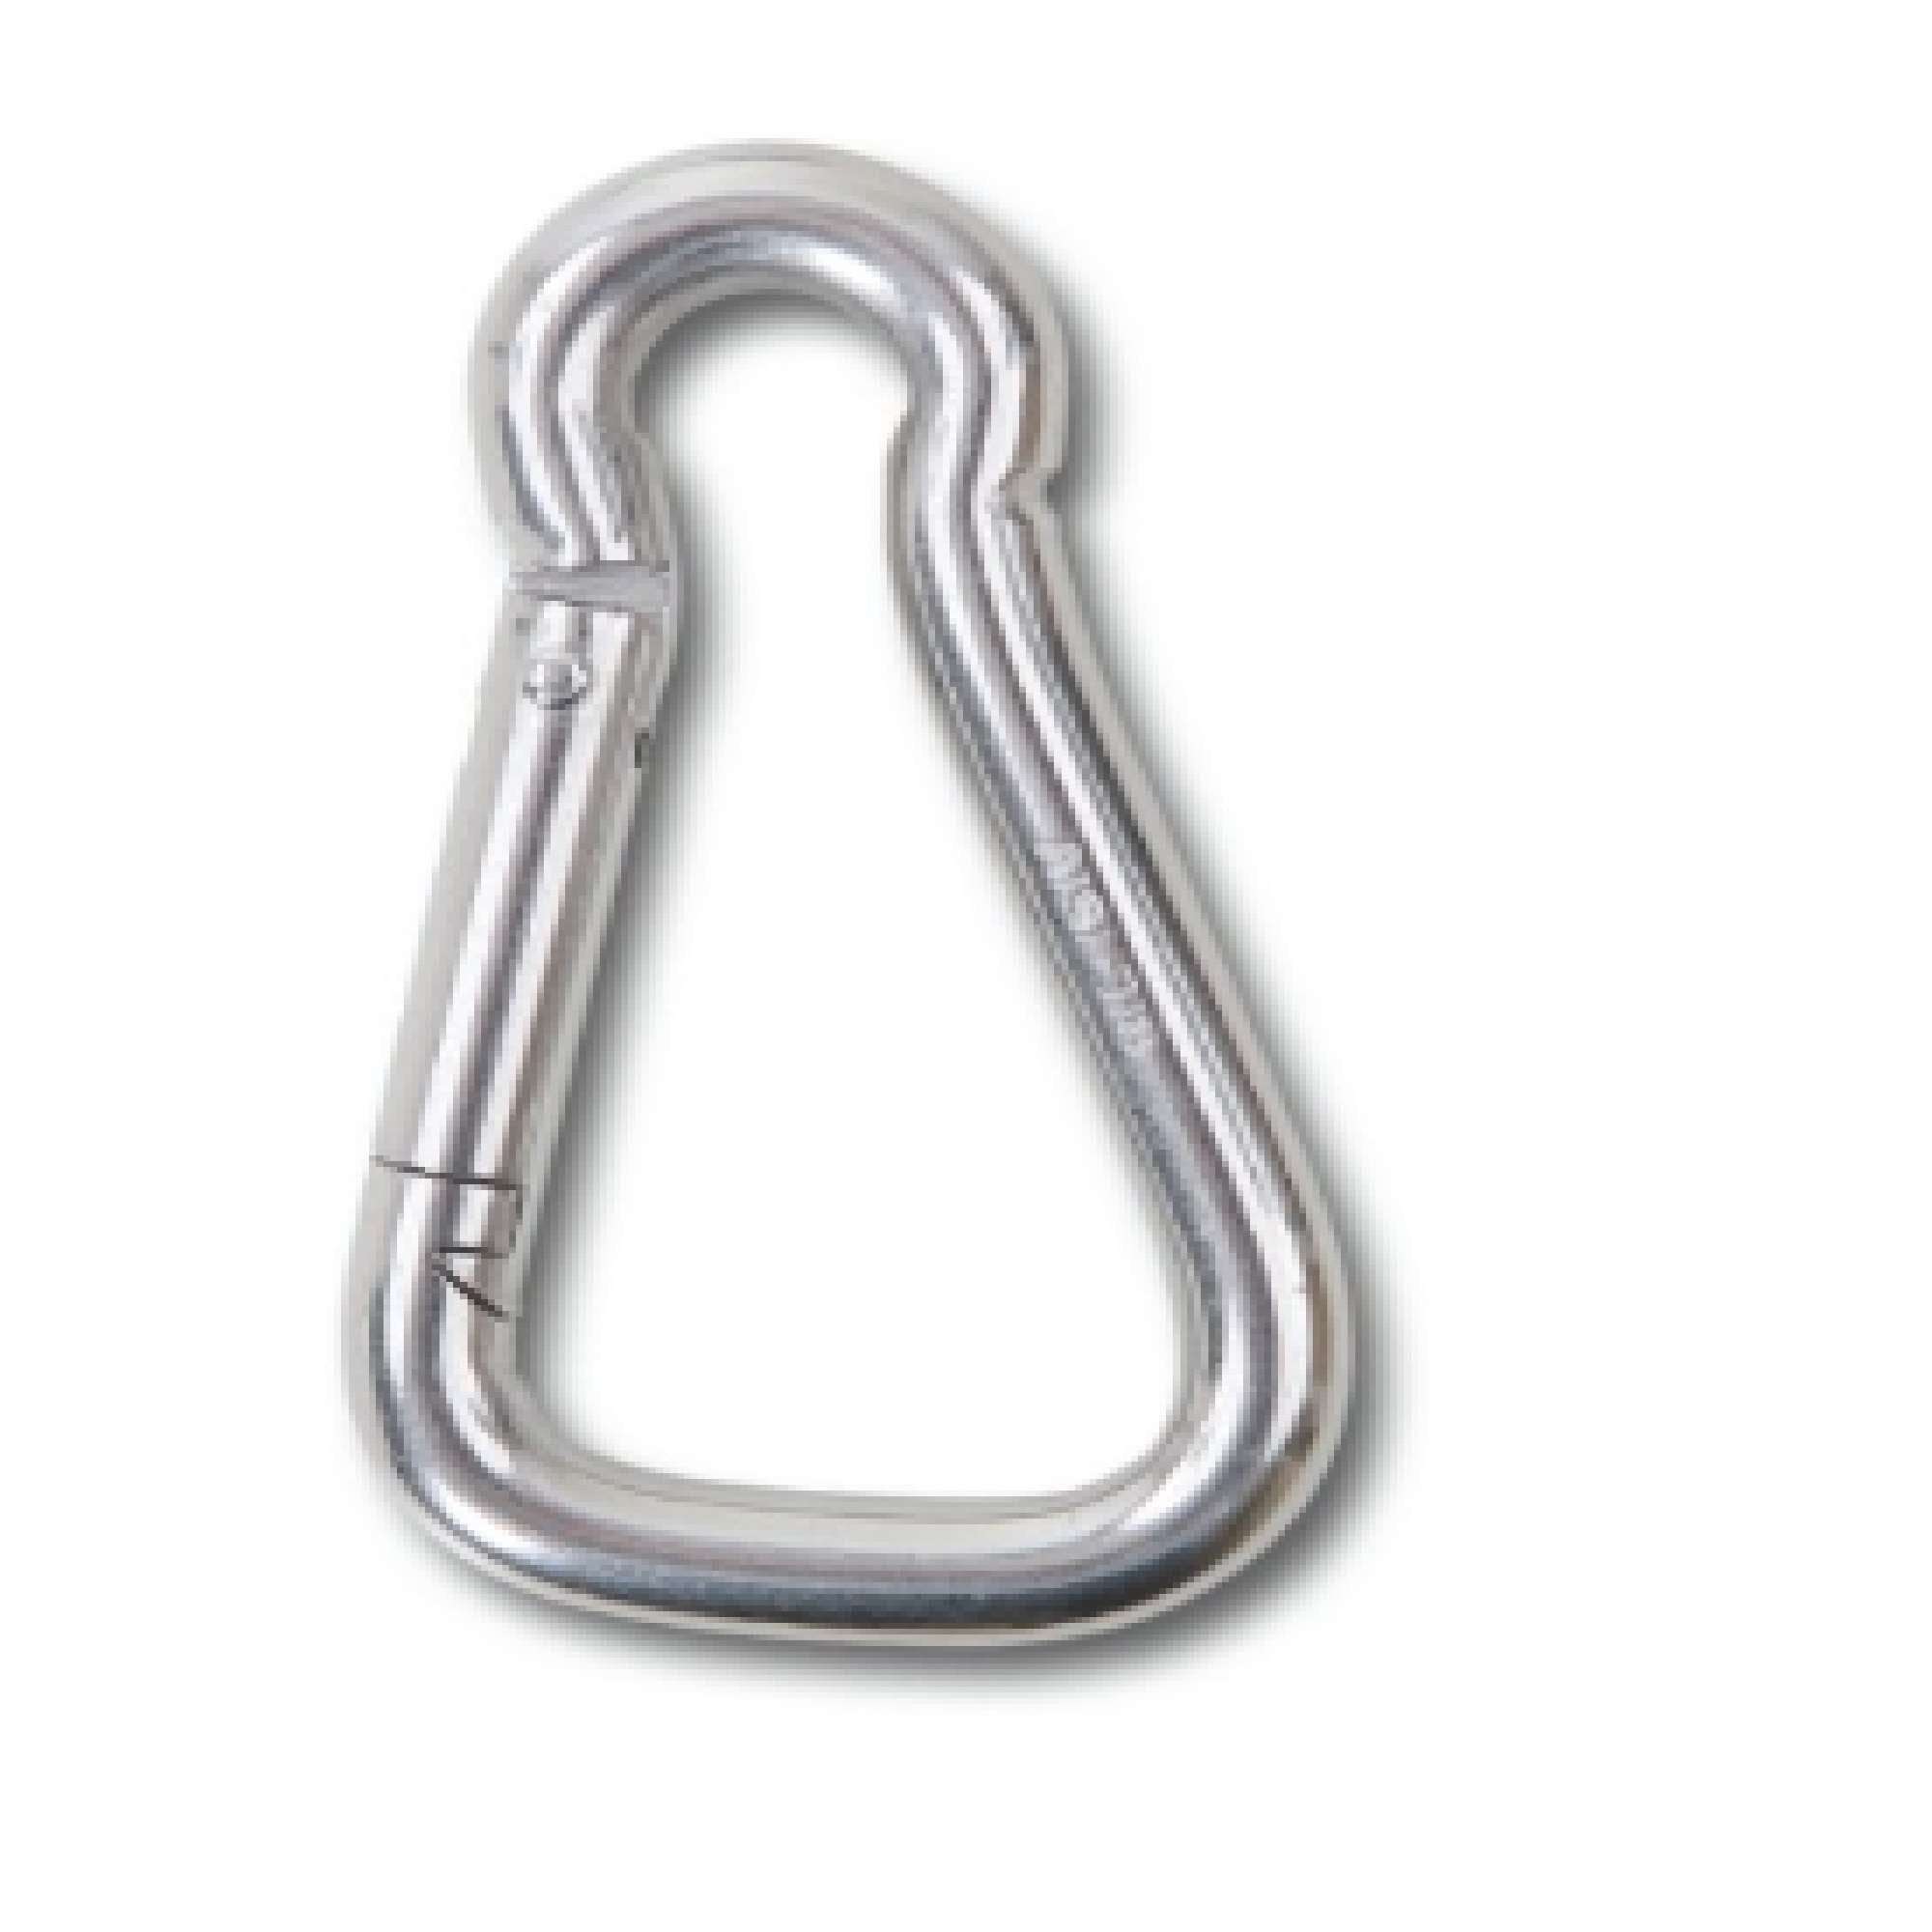 Asymmetrical AISI 316 stainless steel carabiners - Beta 82760208